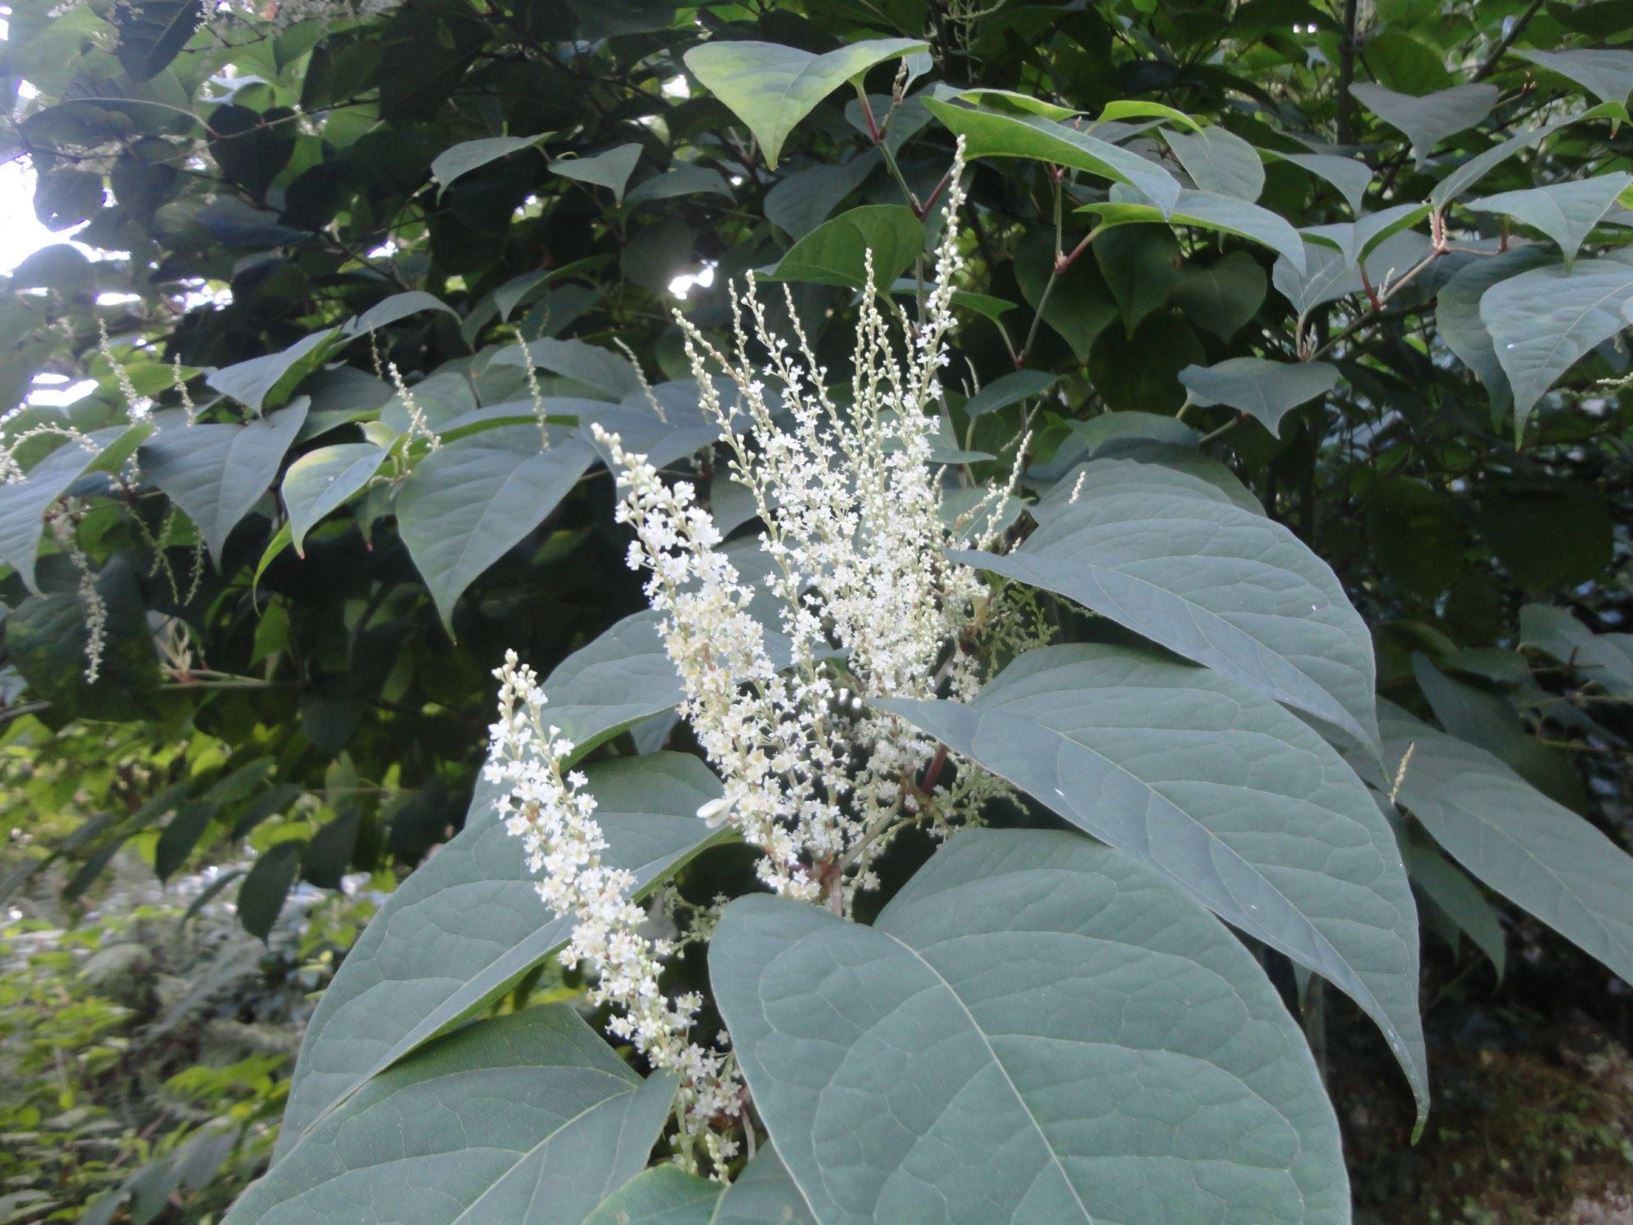 Reynoutria japonica - Japanse duizendknoop, Japanese knotweed, Mexican bamboo, hu zhang, 虎杖